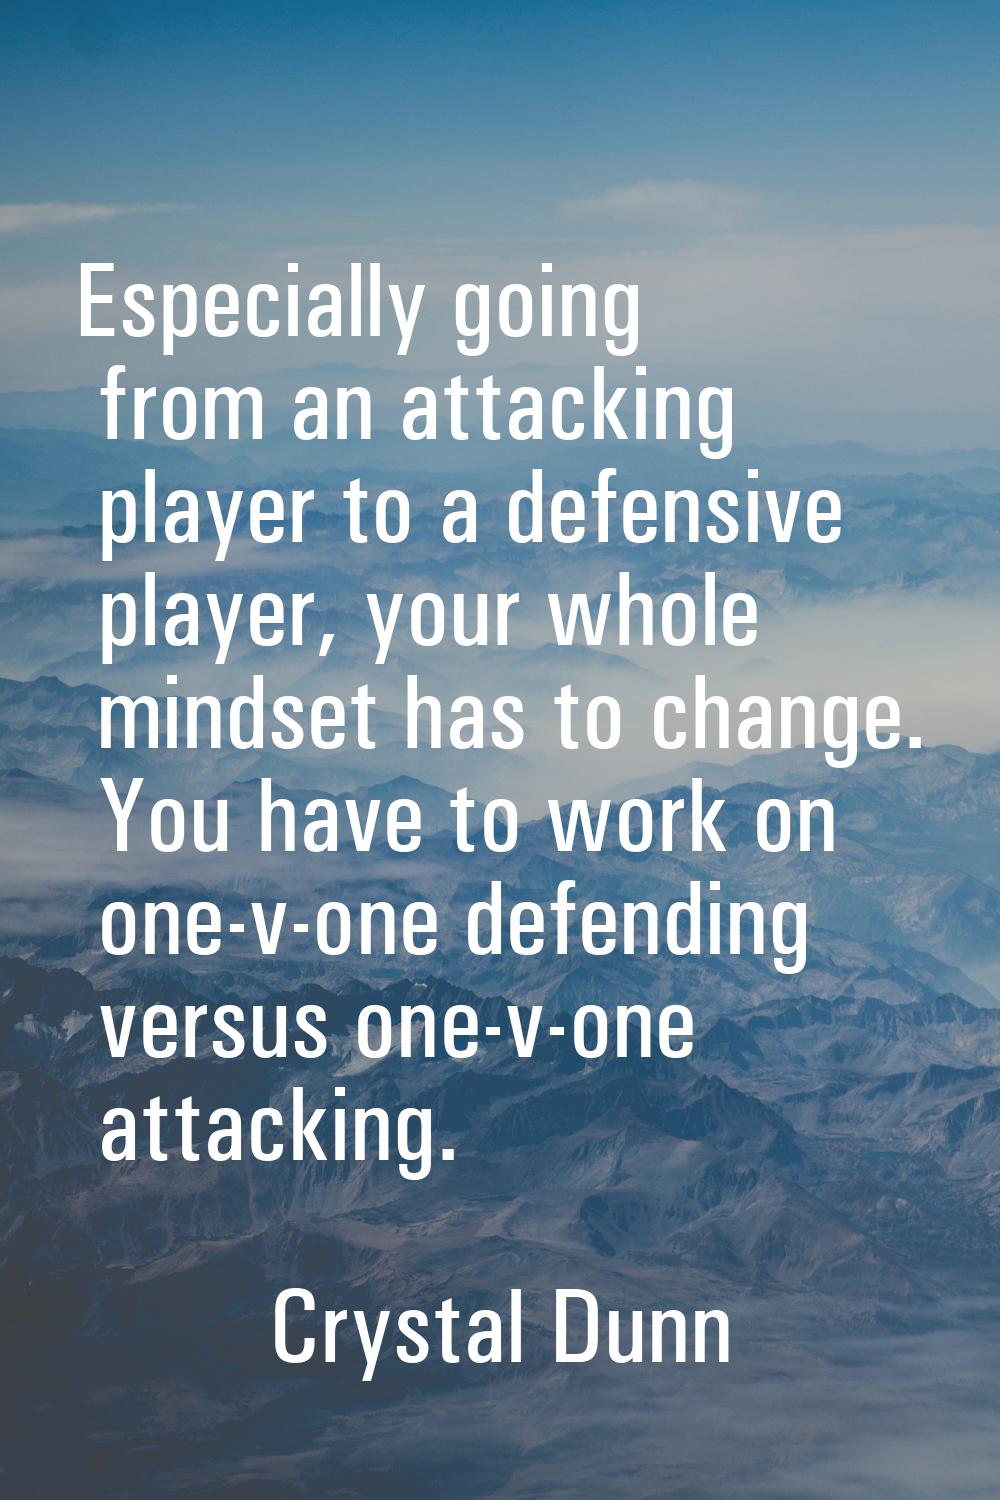 Especially going from an attacking player to a defensive player, your whole mindset has to change. 